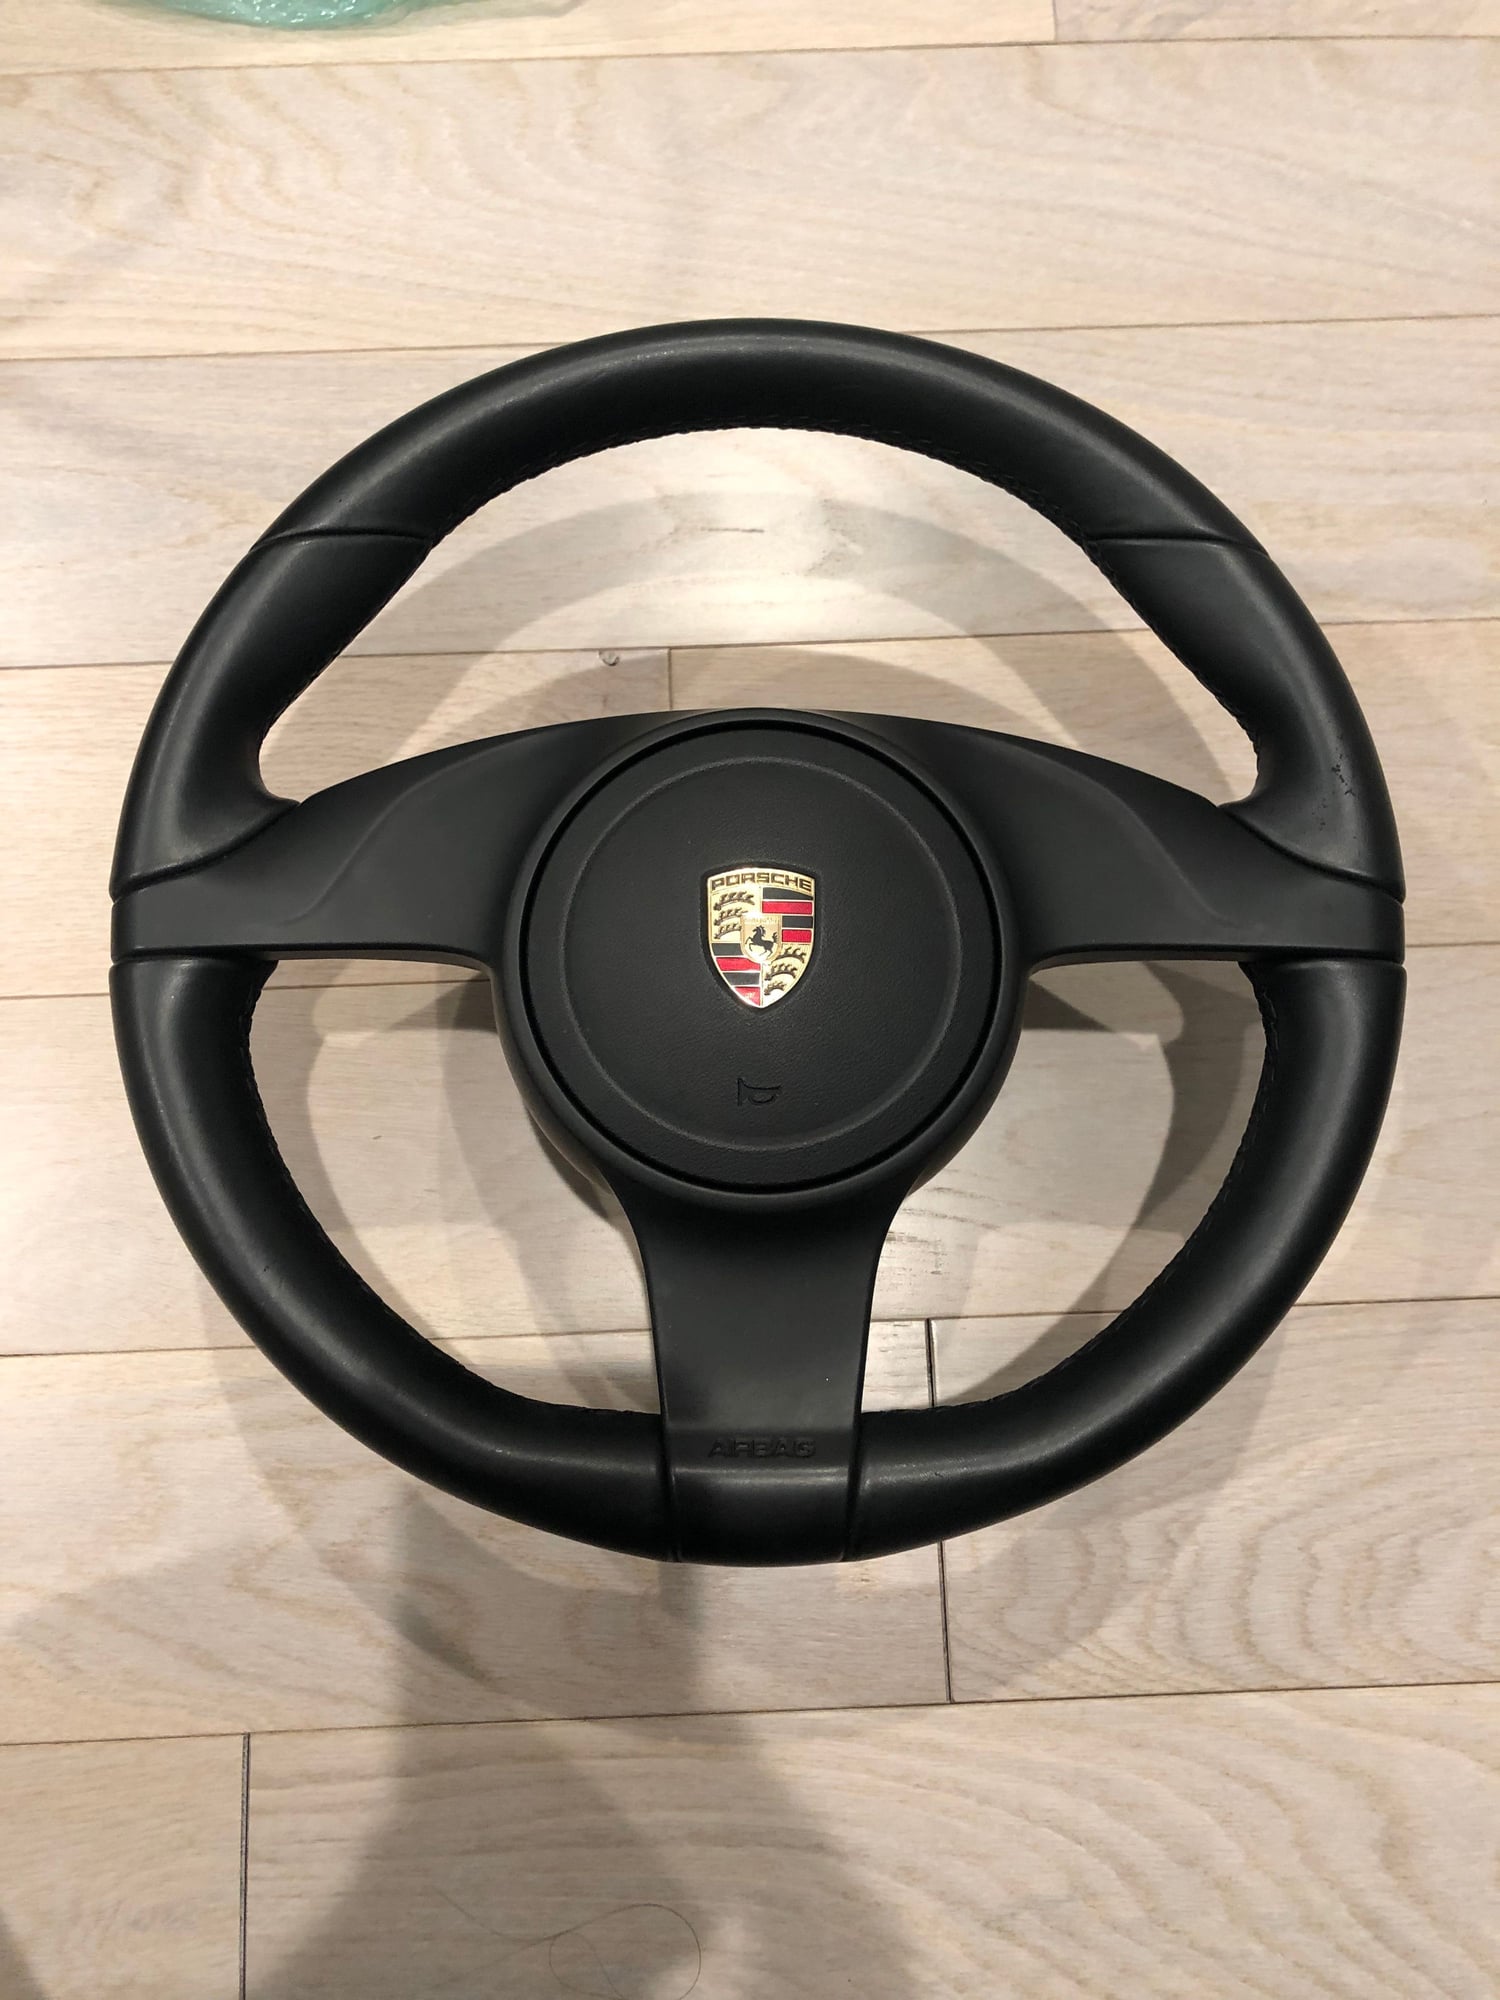 Steering/Suspension - F/S 2011 911 GT3 RS Steering Wheel & Air Bag - Used - 2005 to 2012 Porsche 911 - Queens, NY 11355, United States